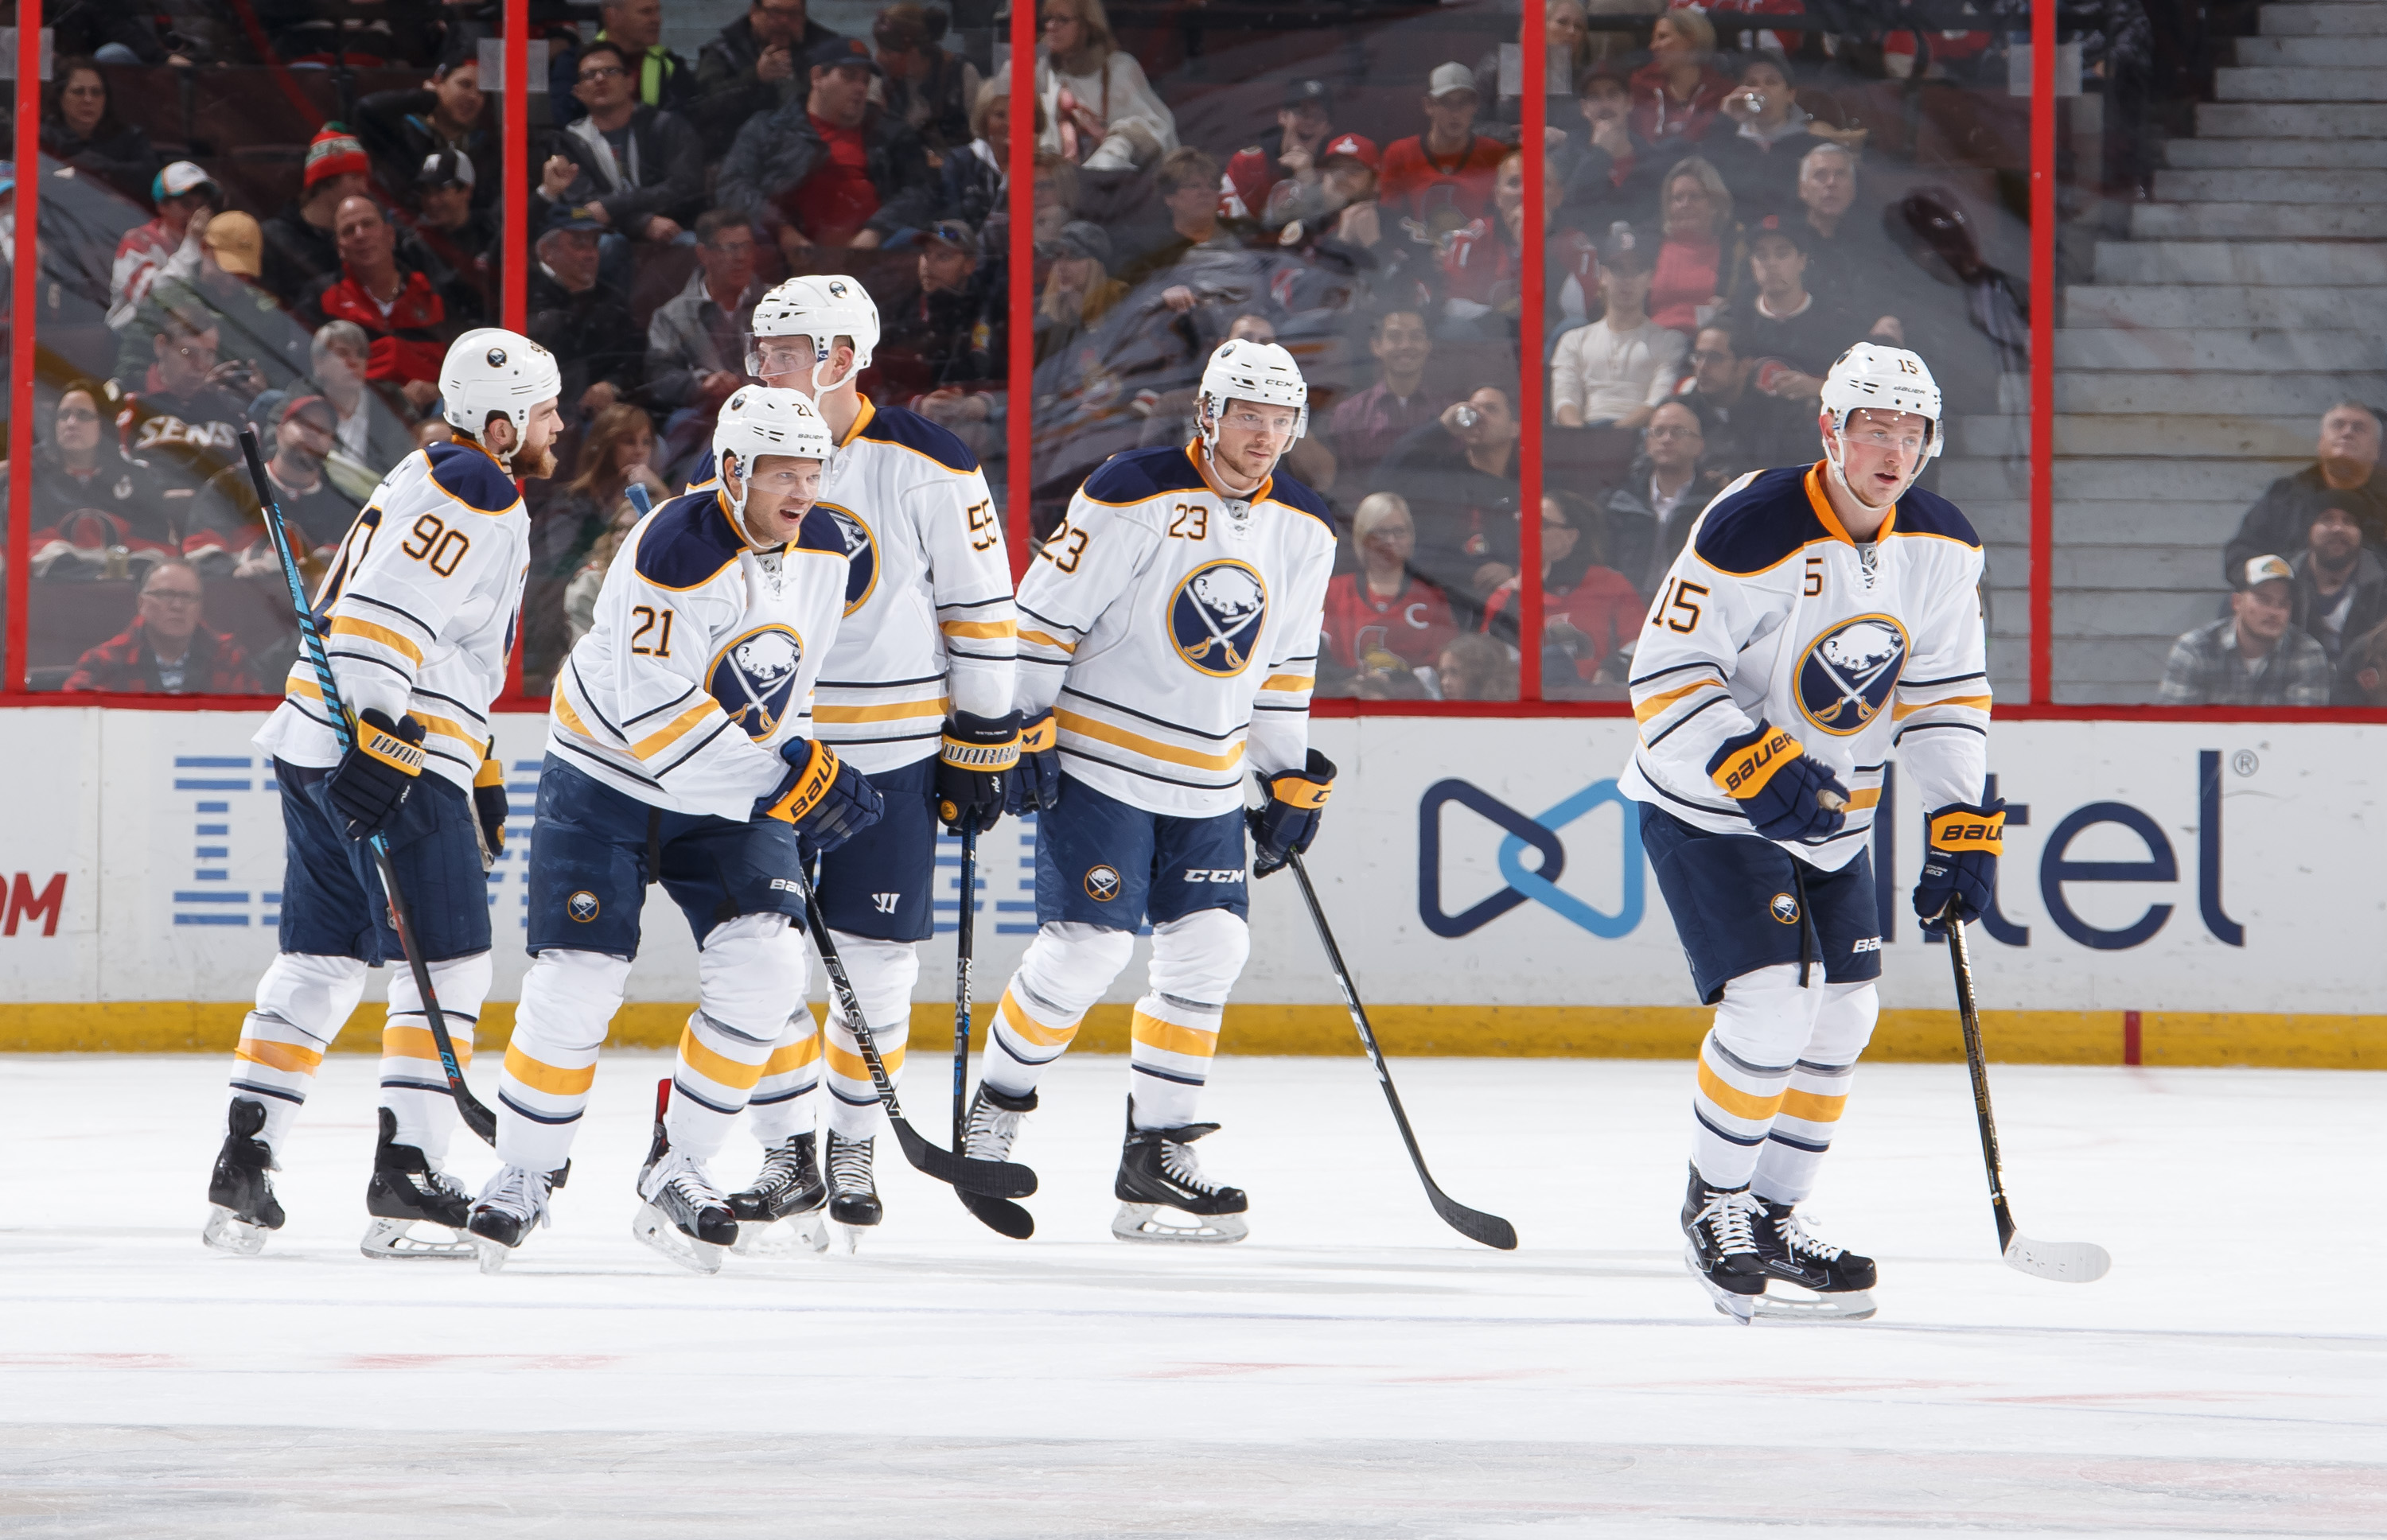 OTTAWA, ON - NOVEMBER 29: Jack Eichel #15 of the Buffalo Sabres celebrates a goal against the Ottawa Senators with teammates Ryan O'Reilly #90, Kyle Okposo #21, Rasmus Ristolainen #55 and Sam Reinhart #23 at Canadian Tire Centre on November 29, 2016 in Ottawa, Ontario, Canada. (Photo by Andre Ringuette/NHLI via Getty Images)